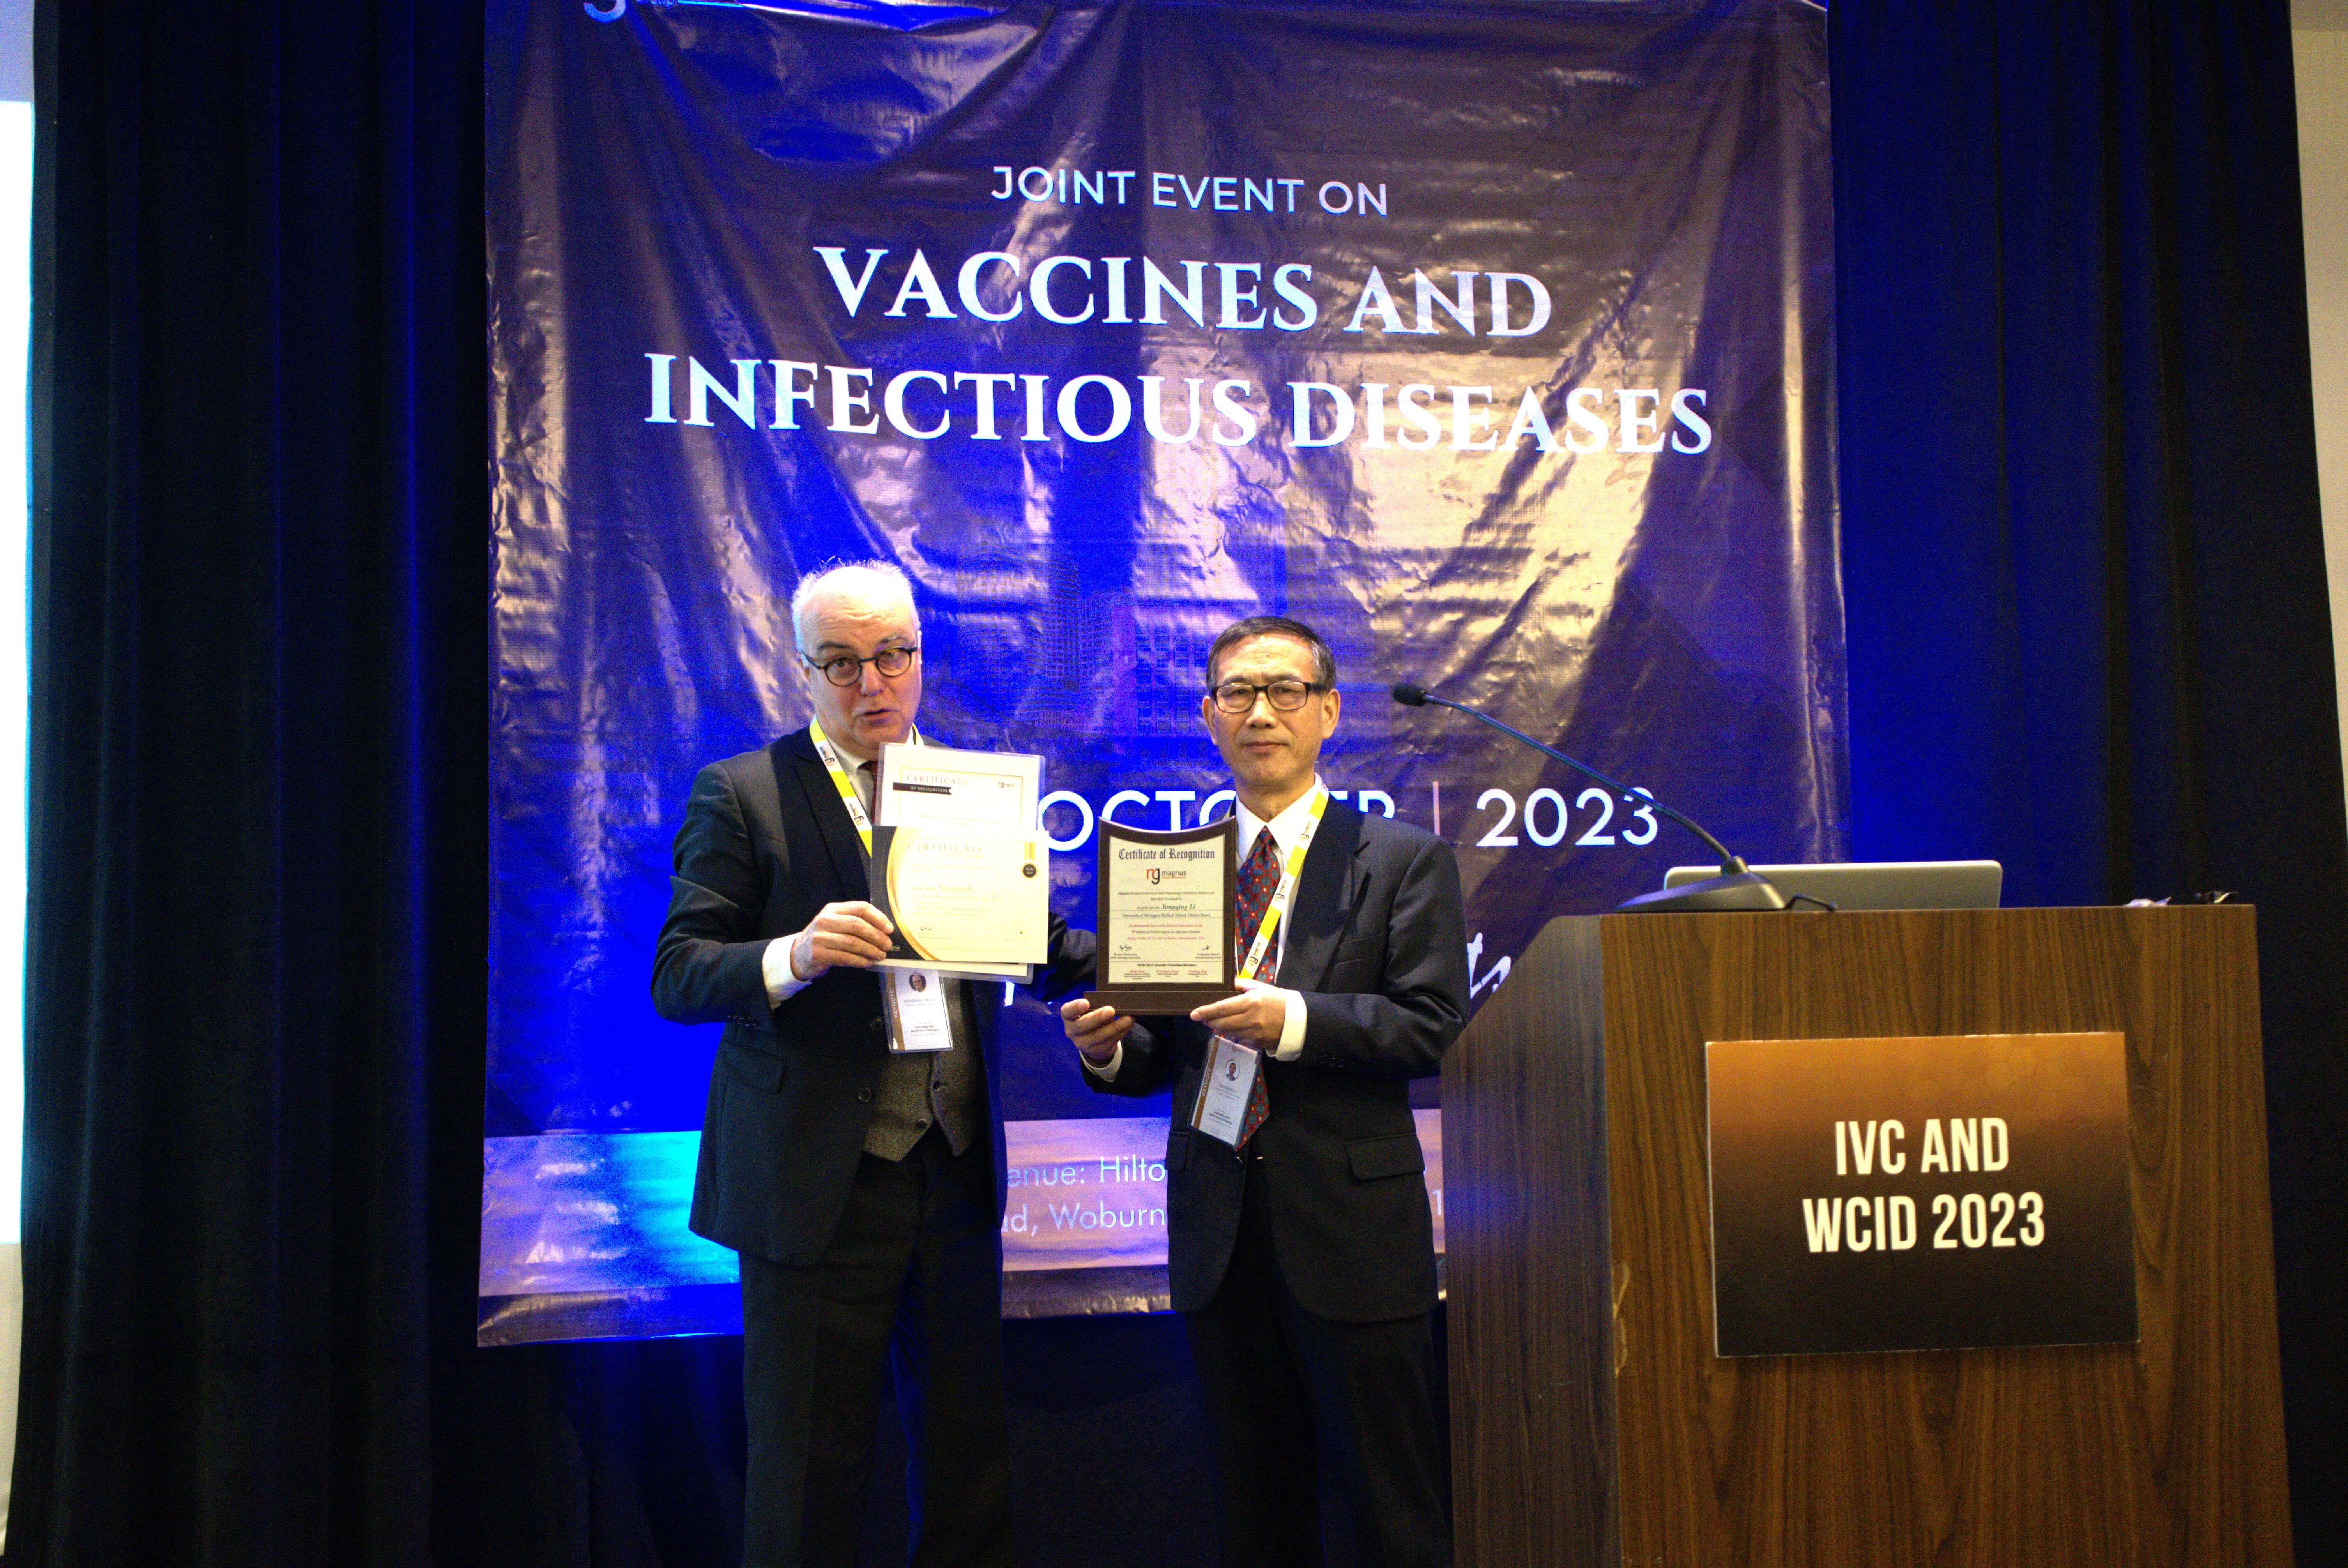 Infectious Diseases Conferences